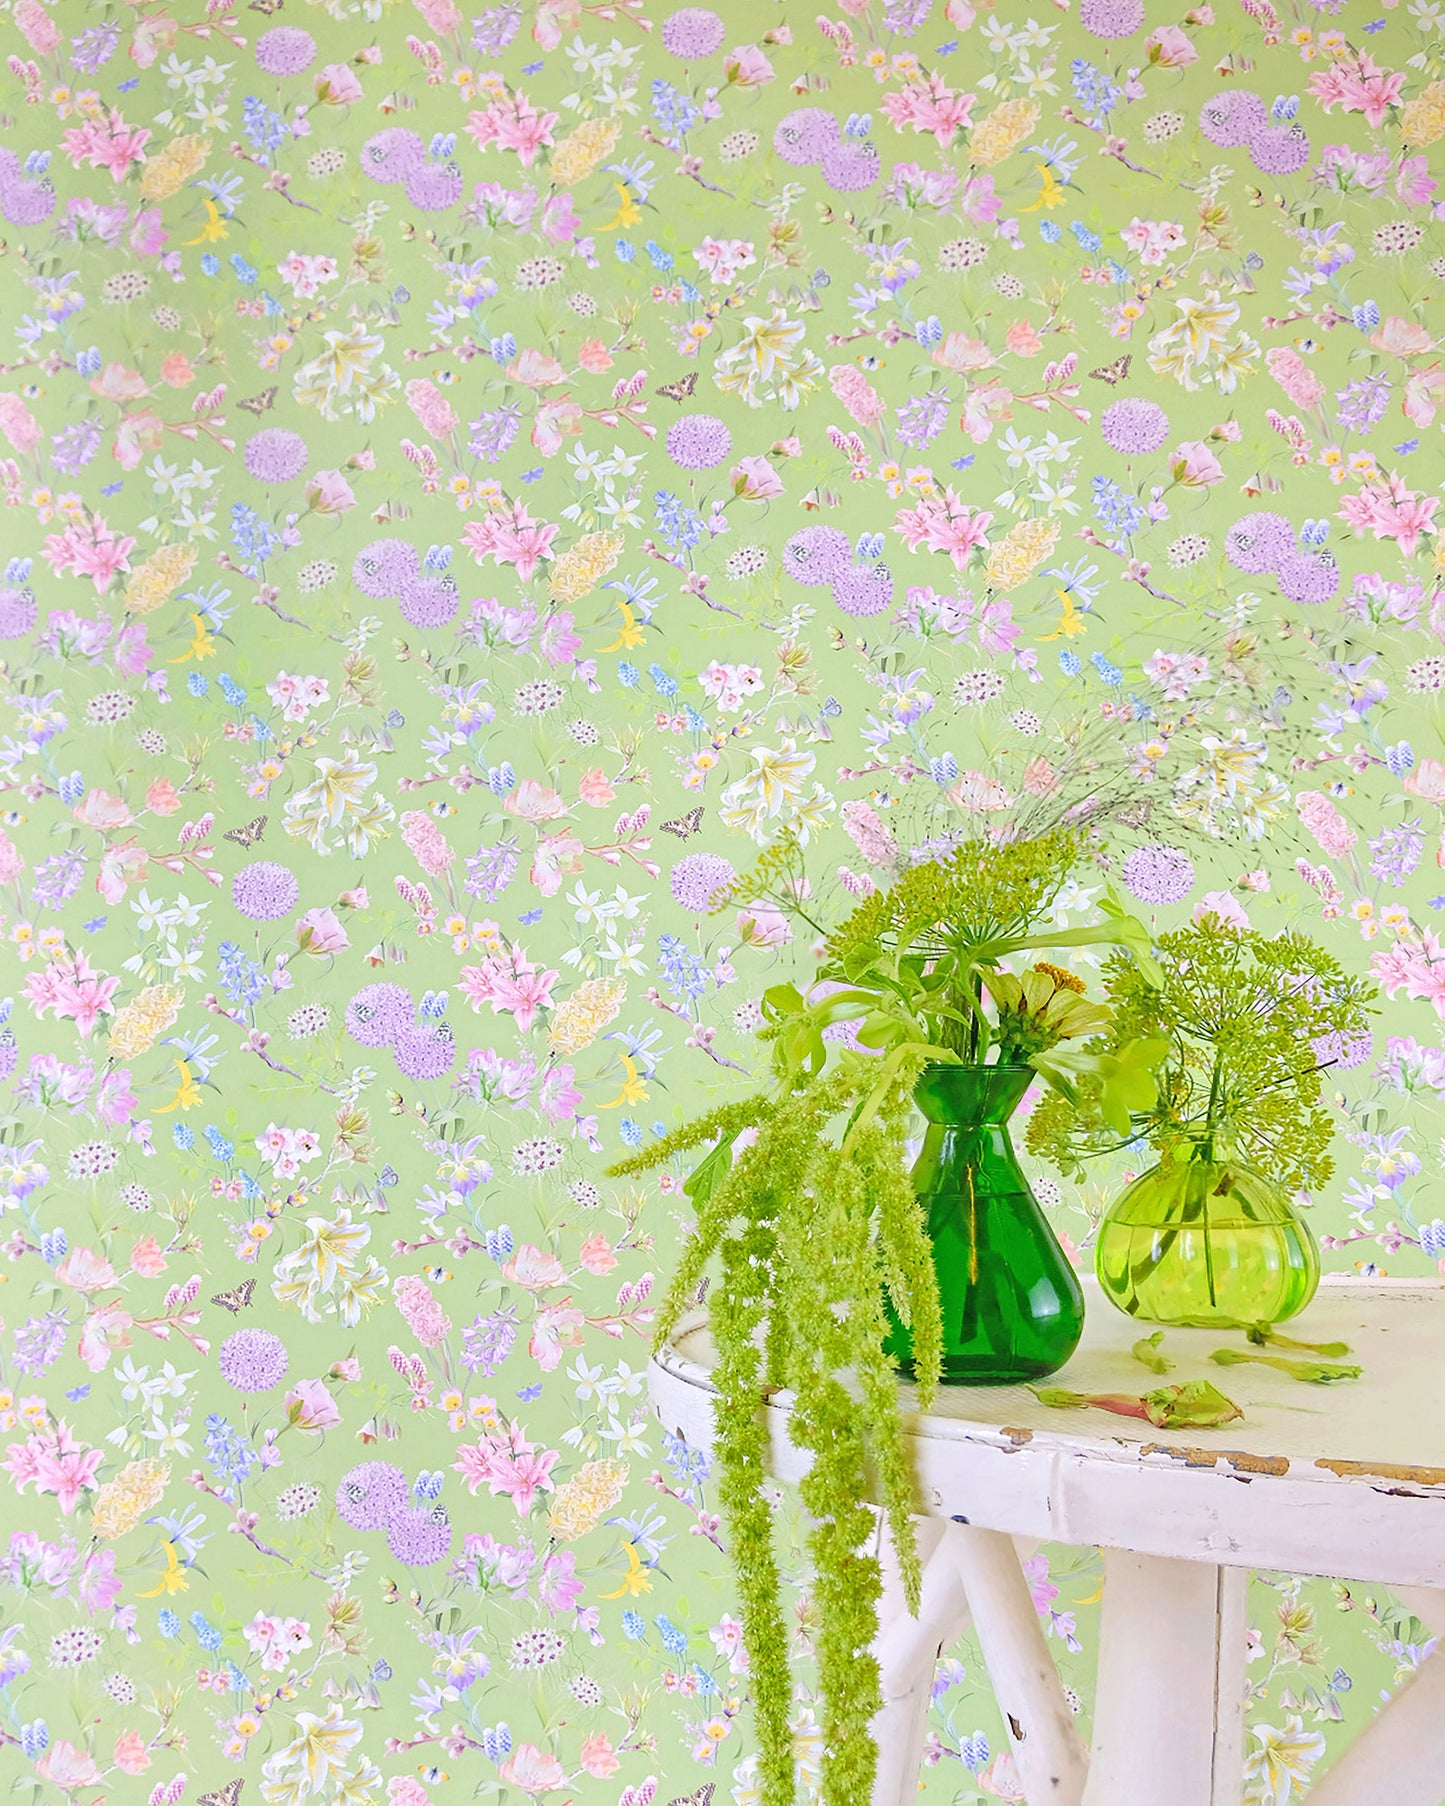 Light green designer wall covering with a hand illustrated nature inspired design for modern home decor